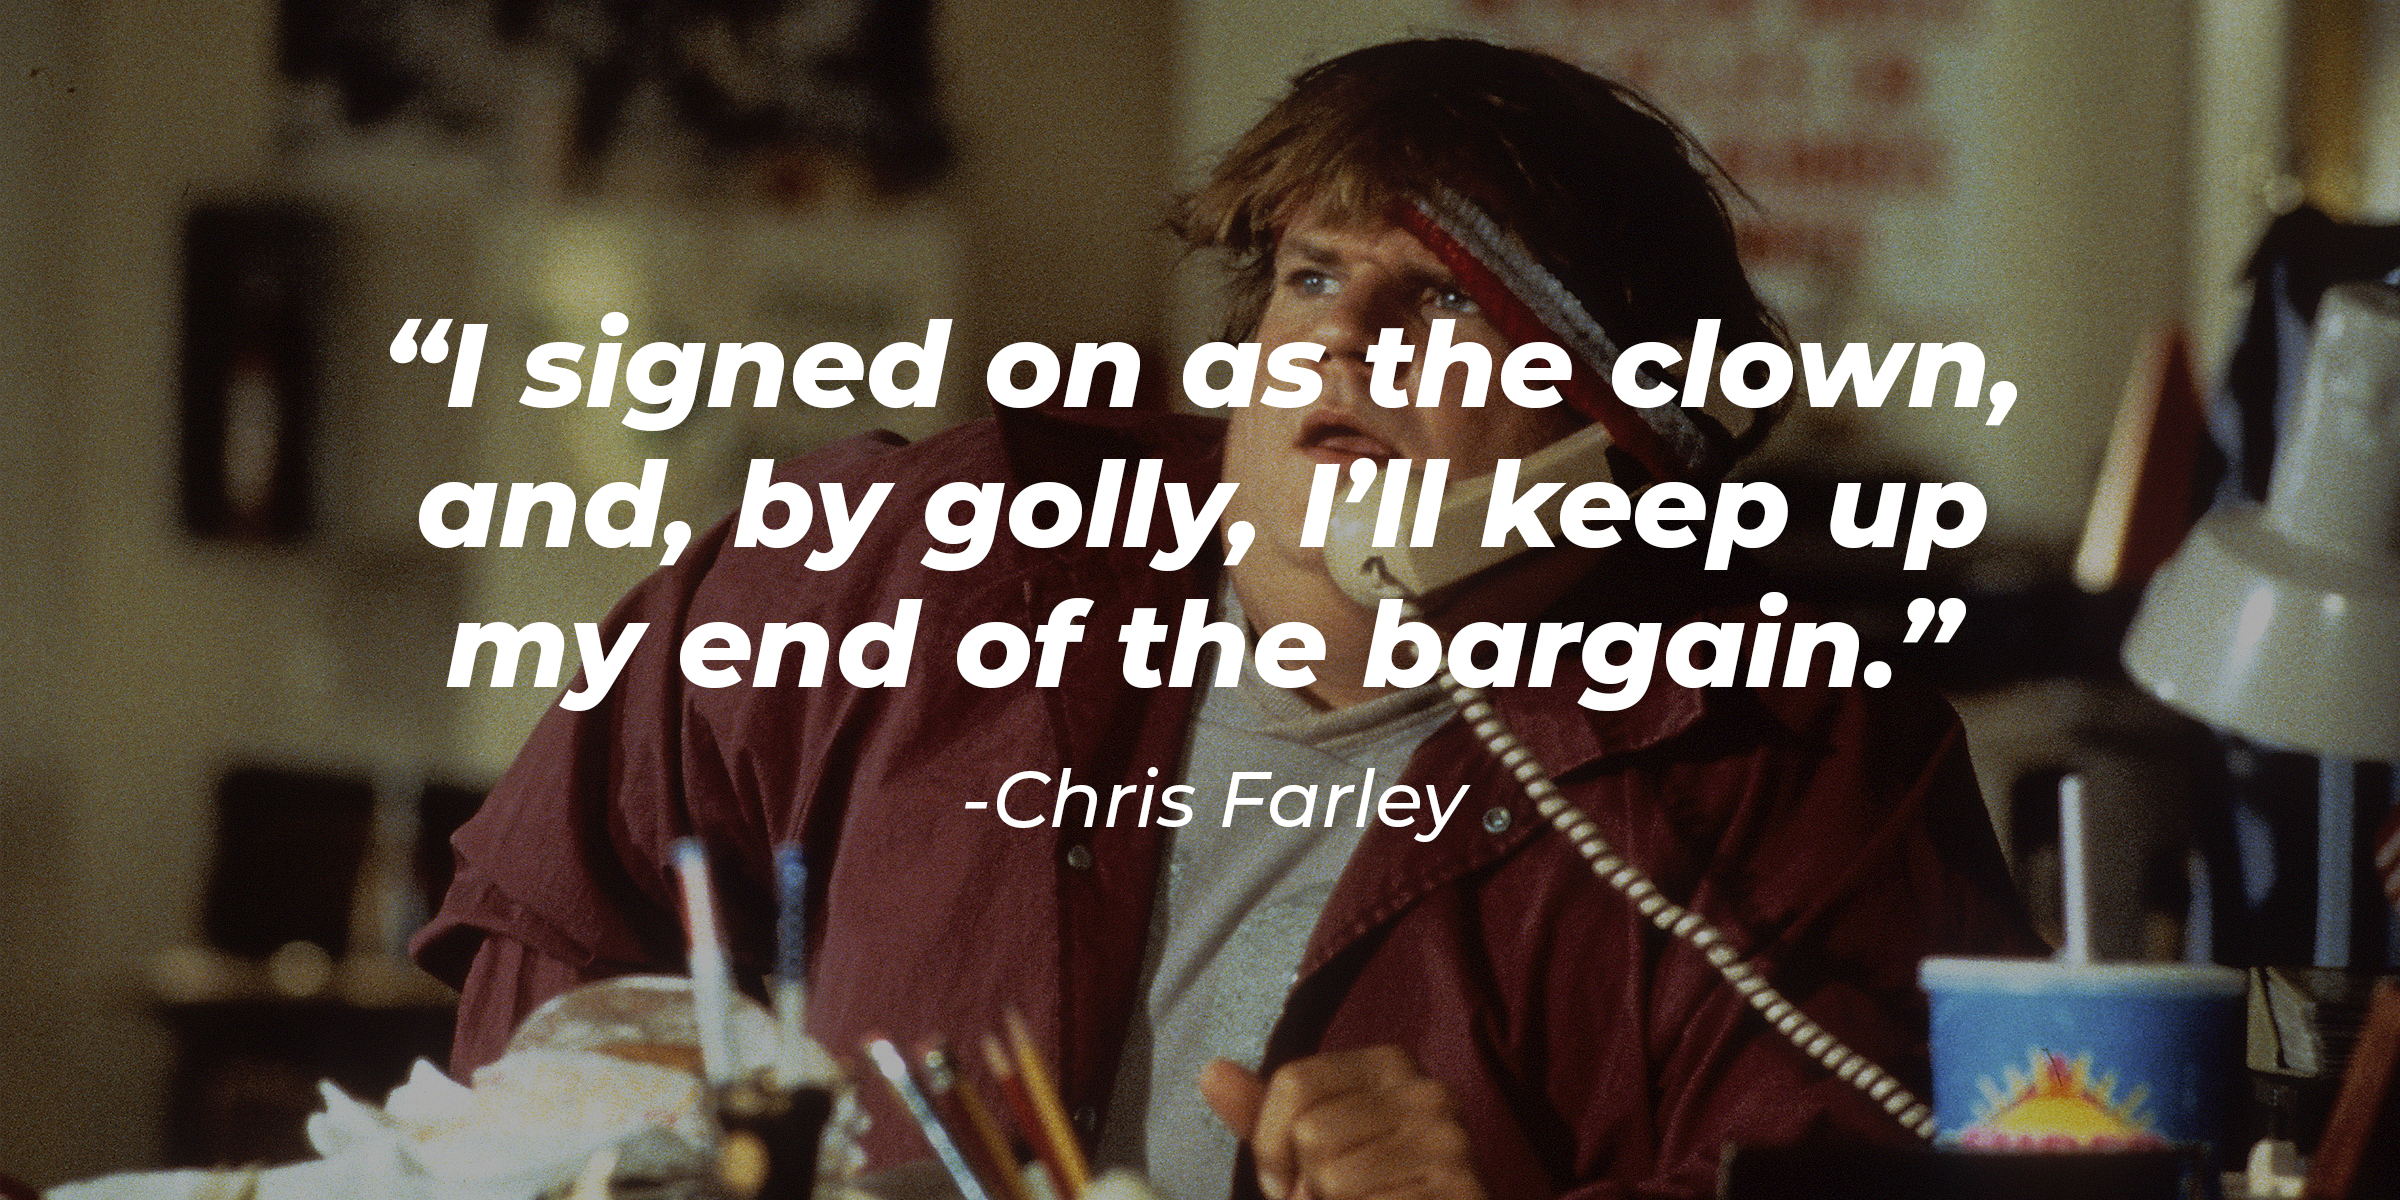 A photo of Chris Farley with Chris Farley's quote: “I signed on as the clown, and, by golly, I’ll keep up my end of the bargain.” | Source: Getty Images